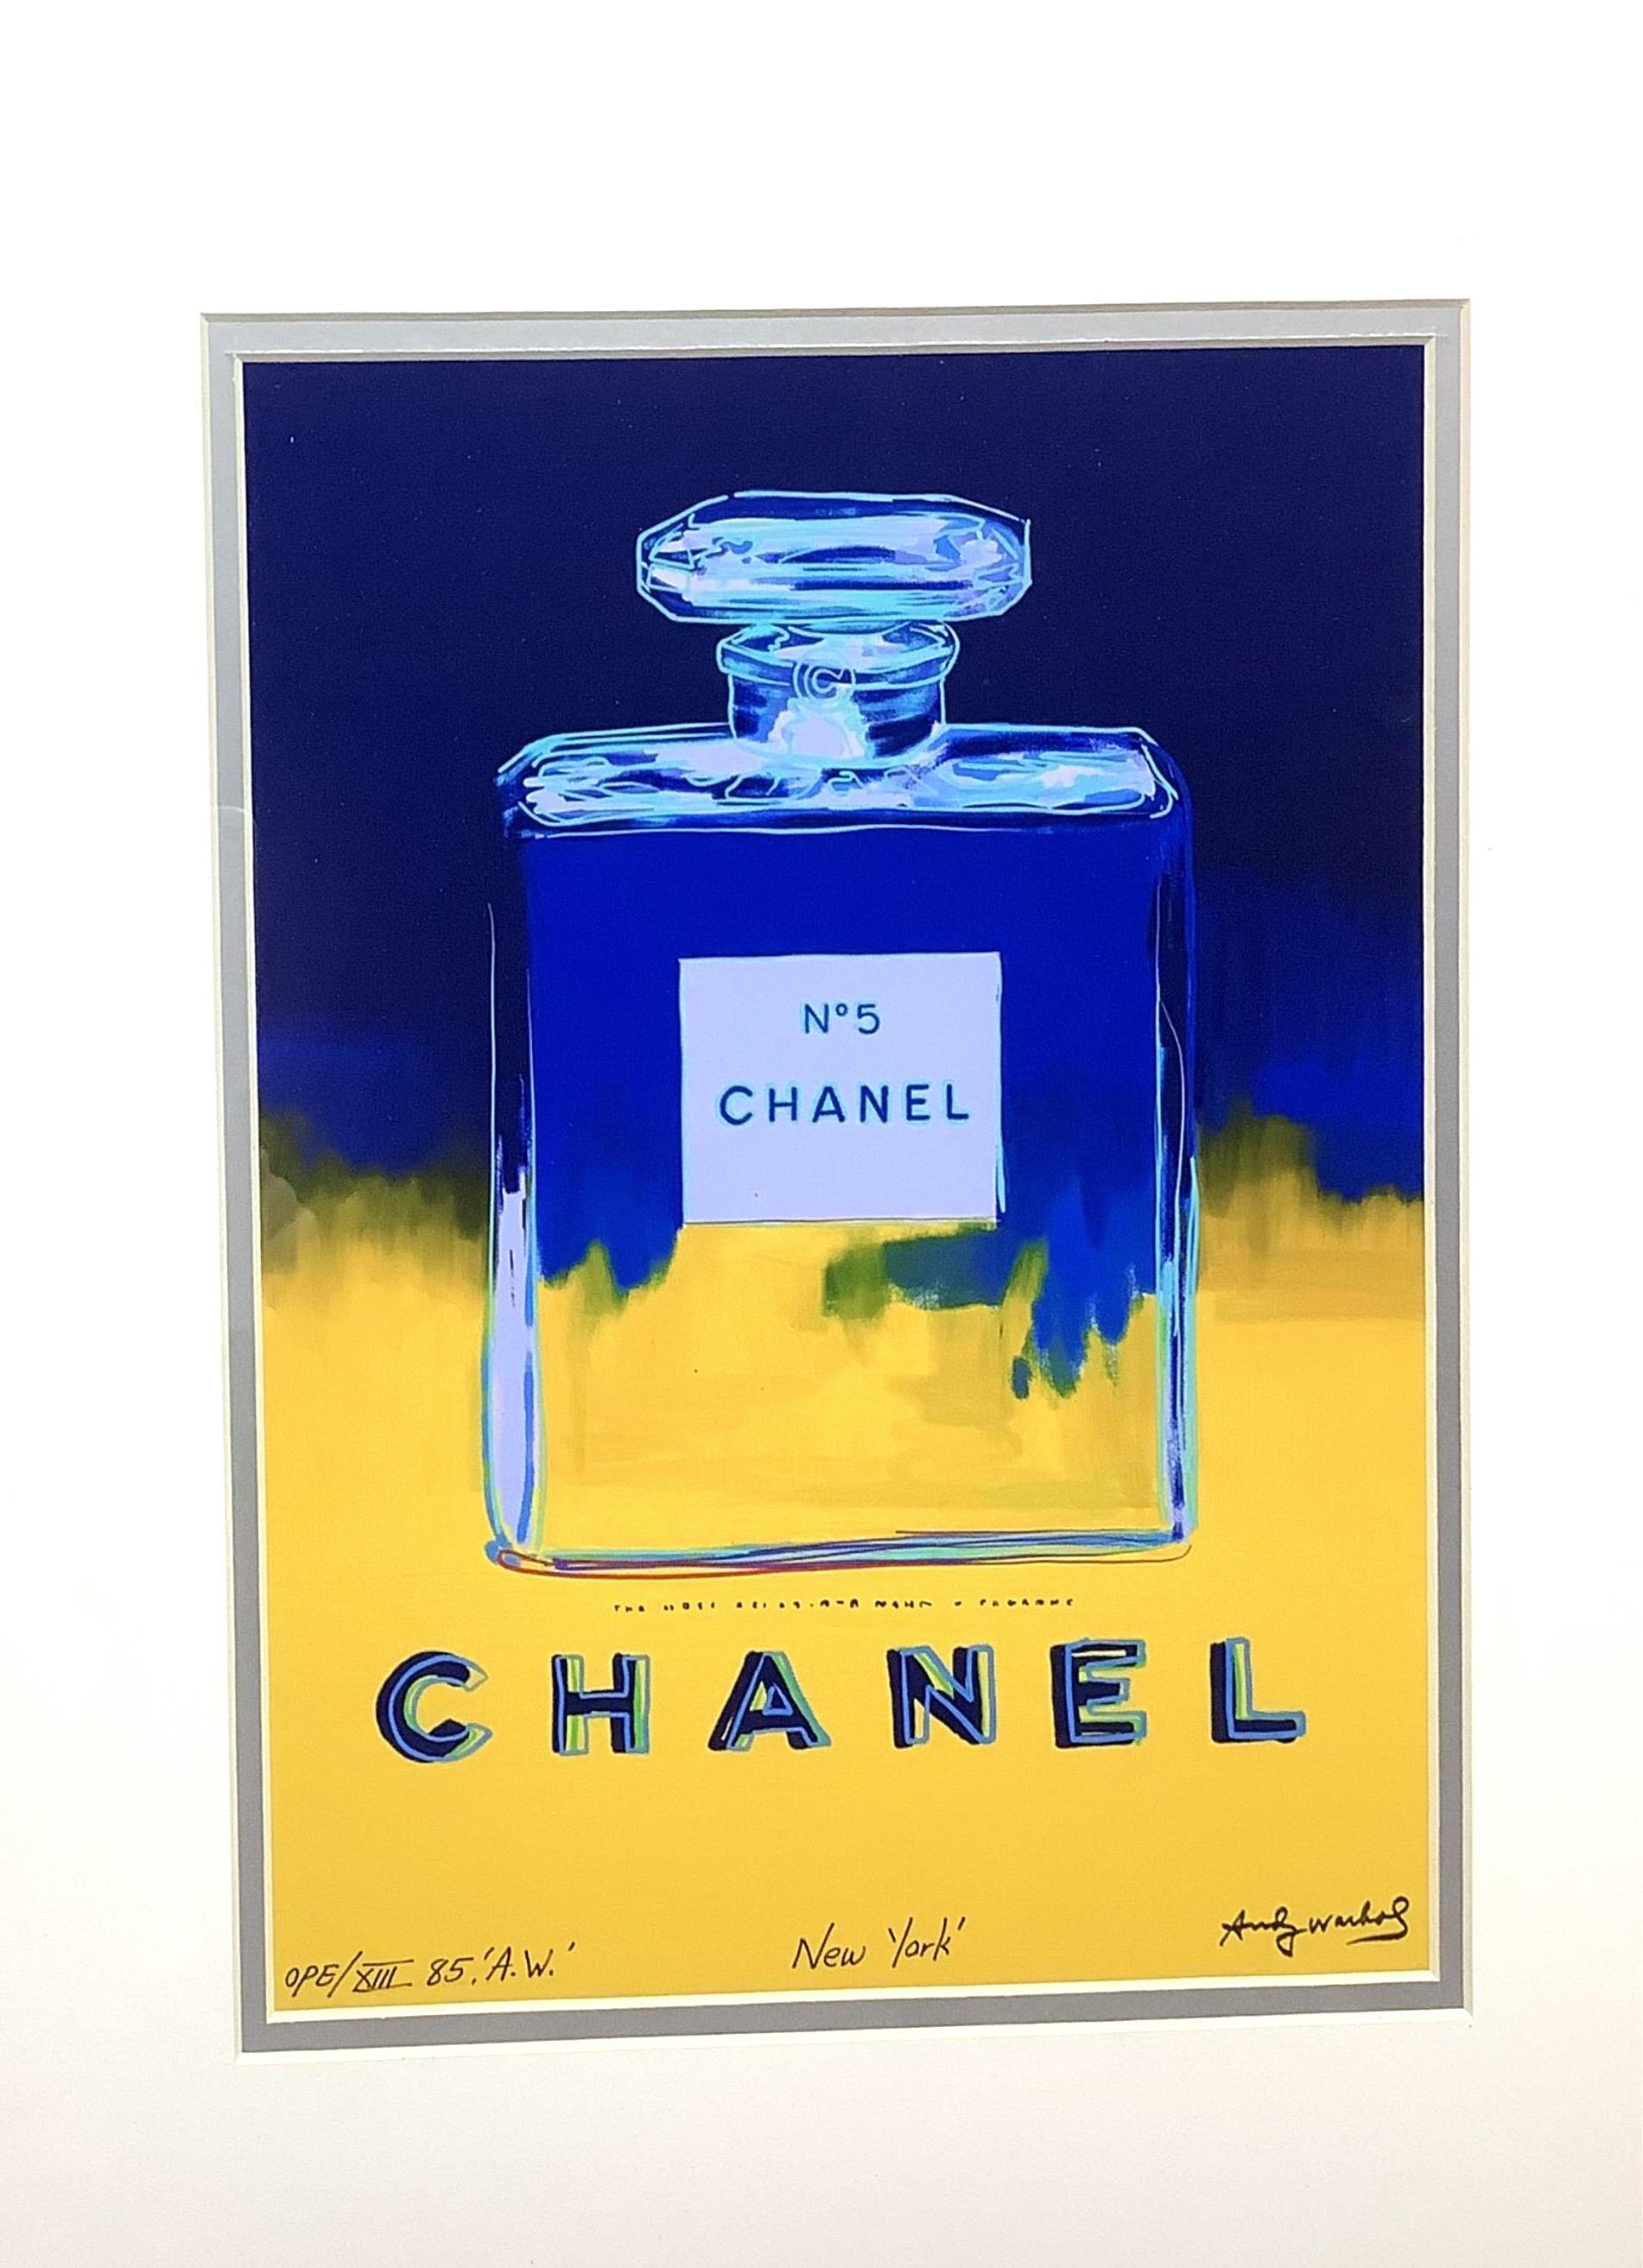 Chanel No.5 by Andy Warhol